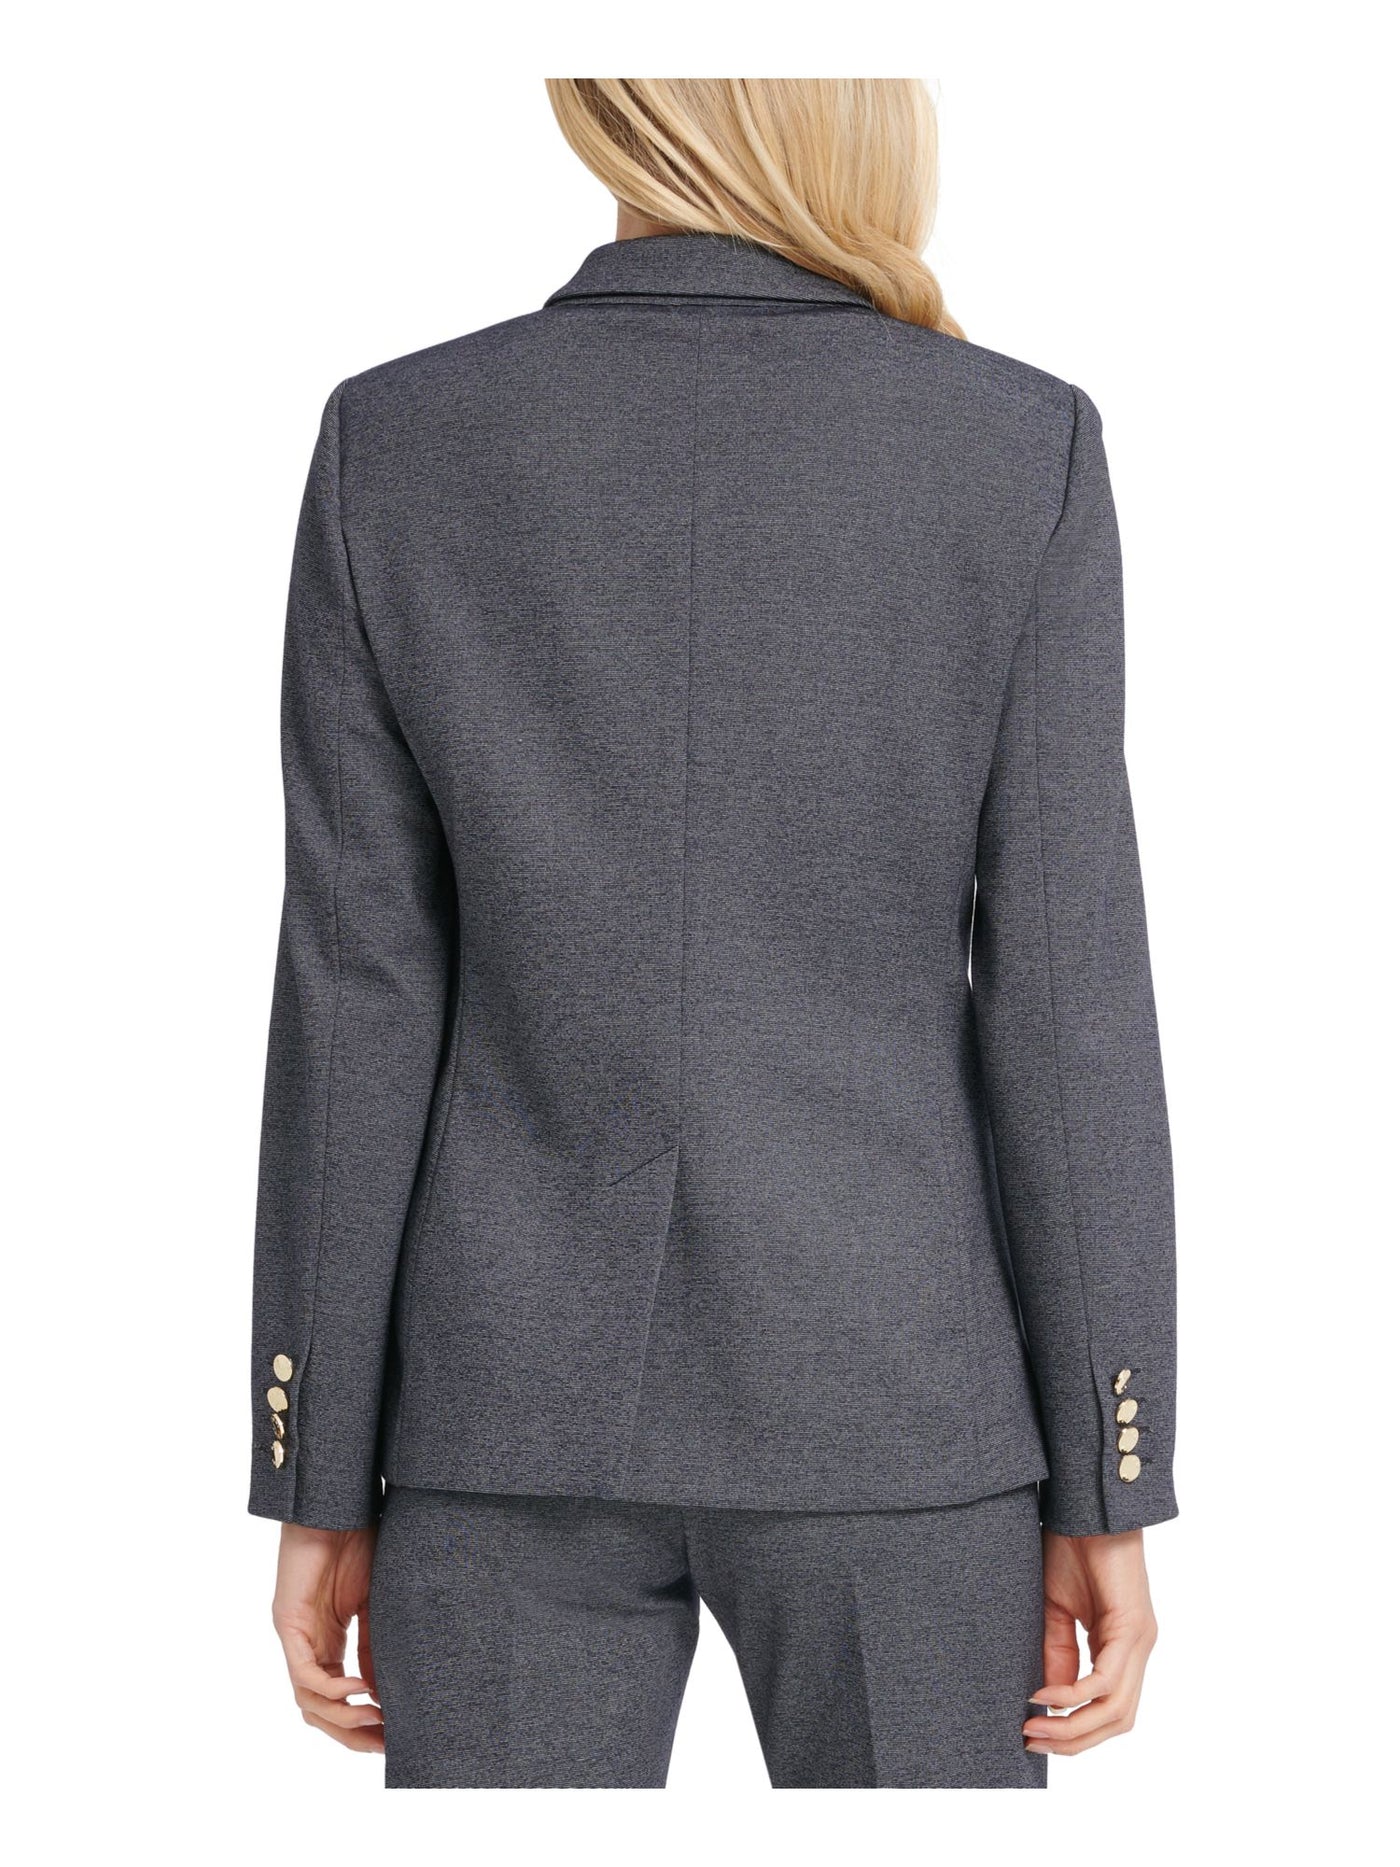 DKNY Womens Blue Stretch Pocketed Lined One-button Long Sleeve Wear To Work Blazer Jacket 10